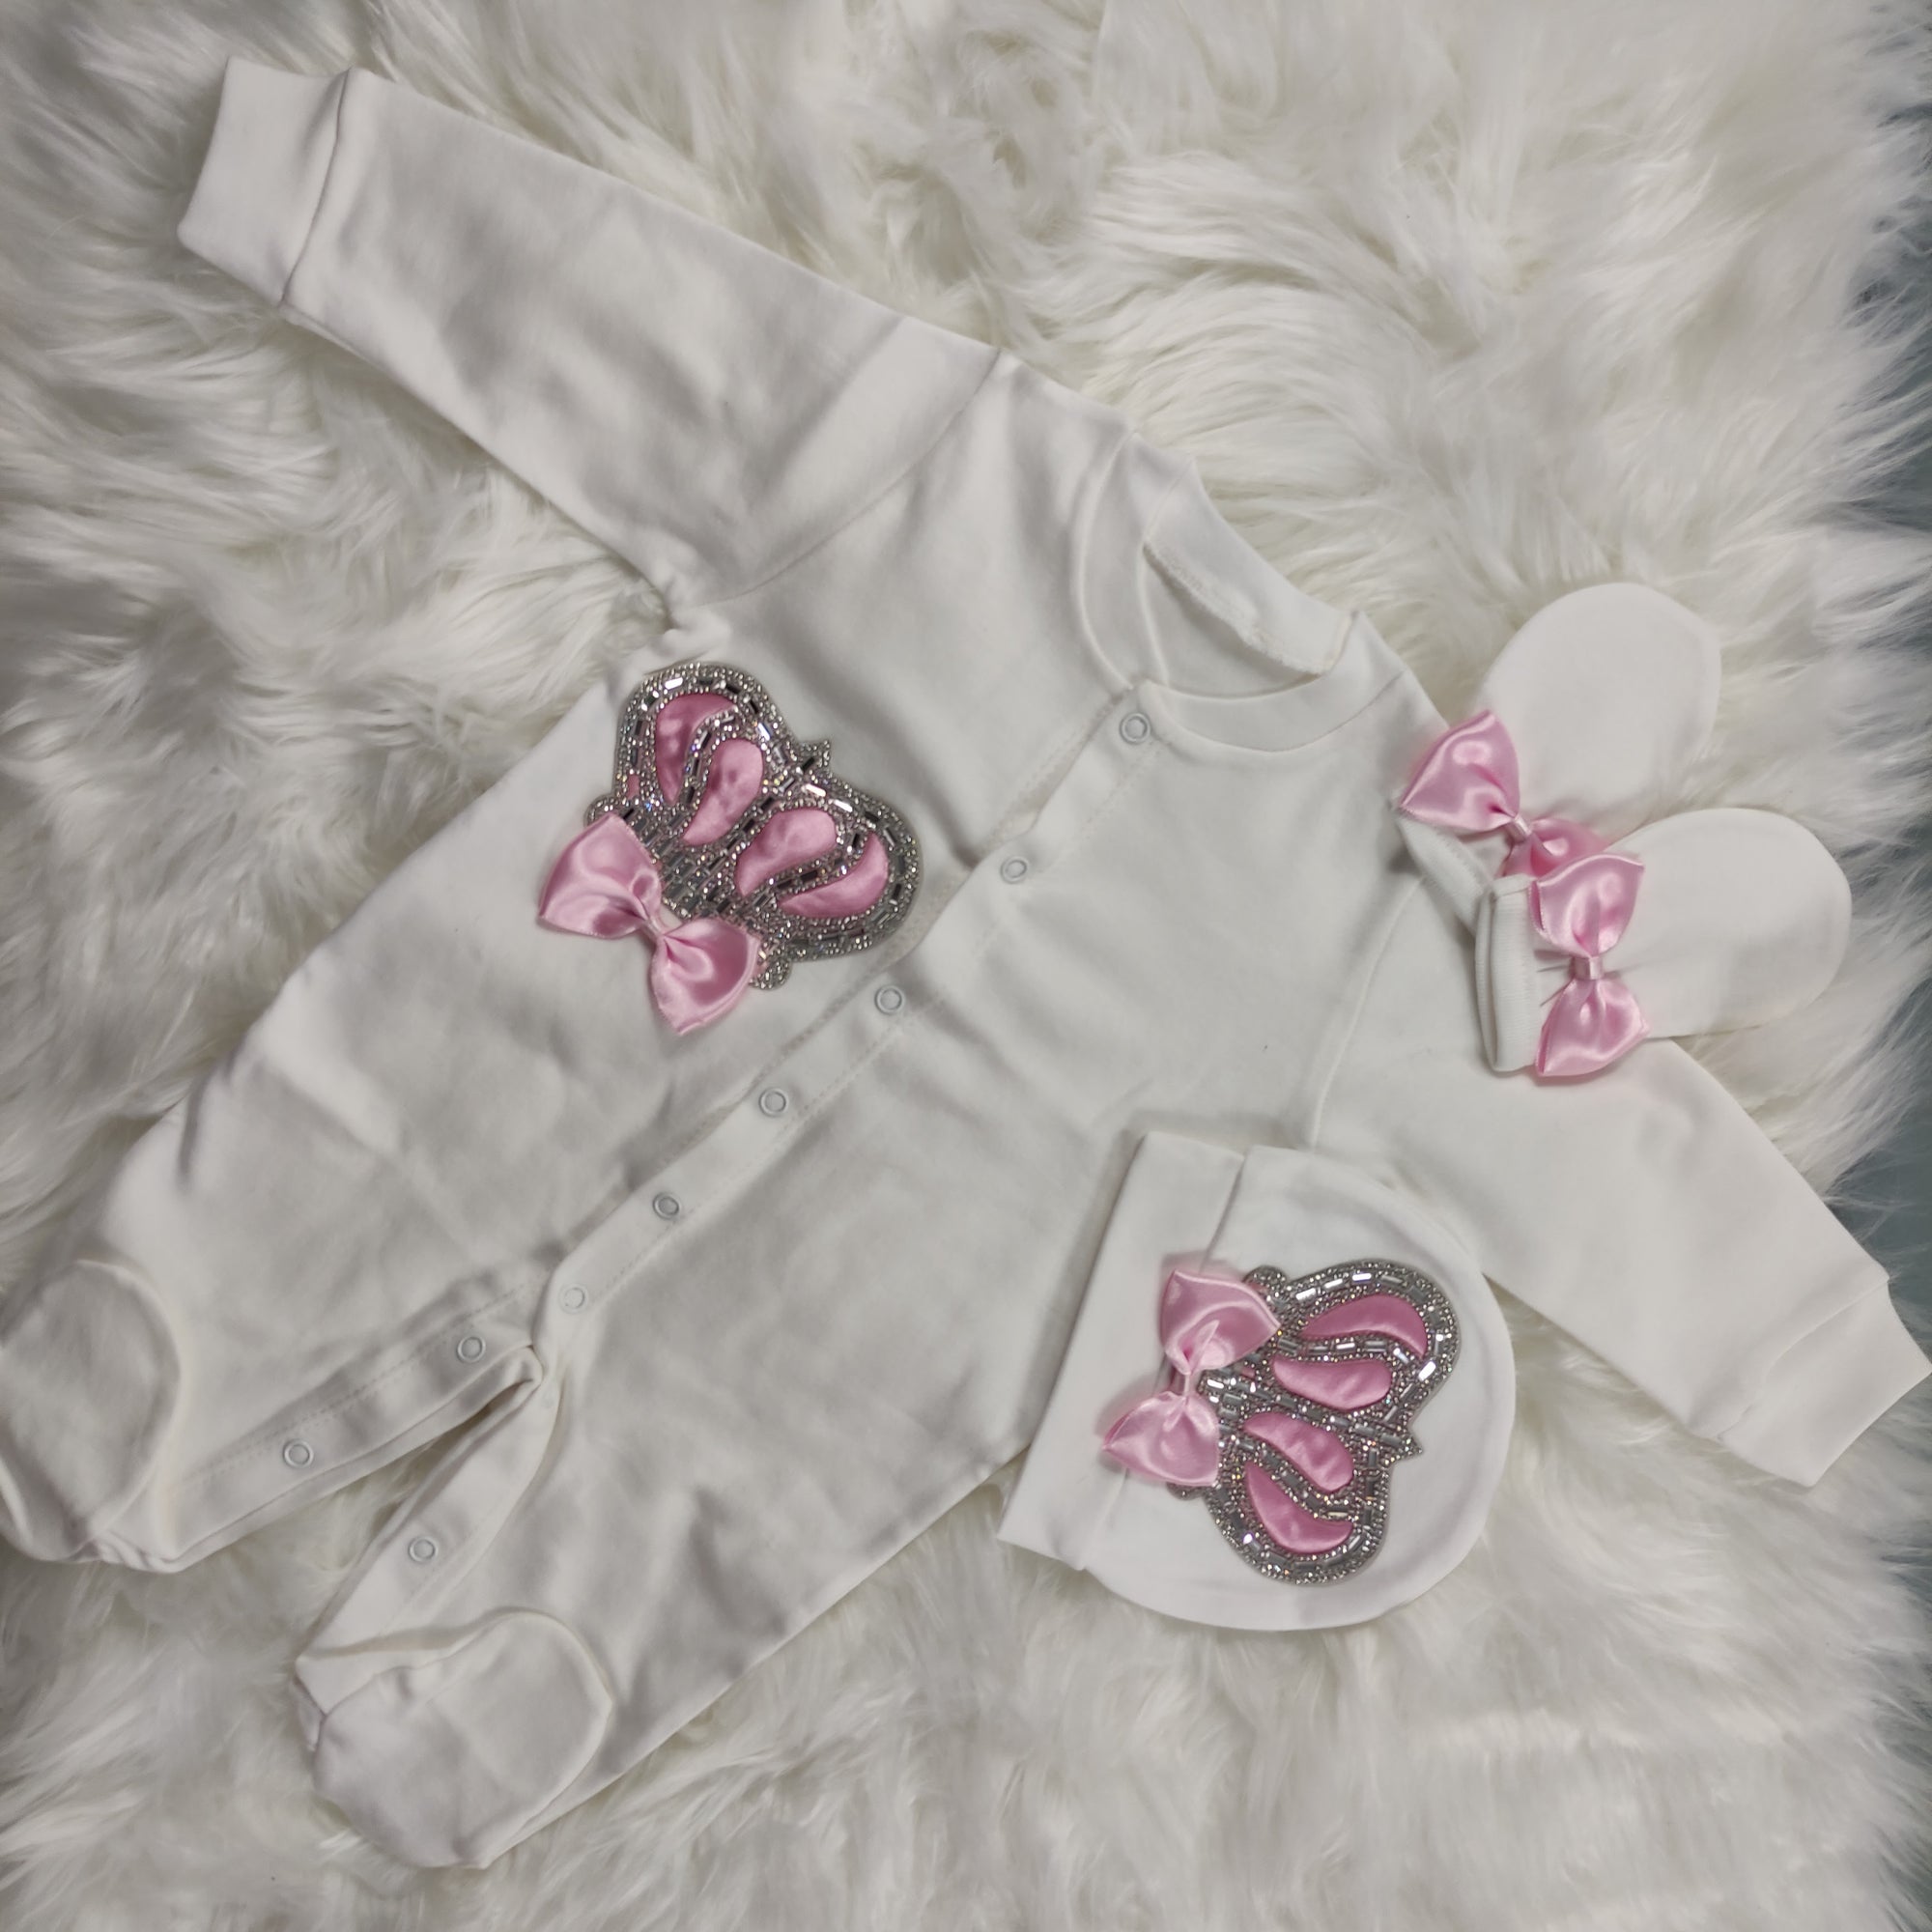 3 PIECE PINK AND WHITE CROWN SET